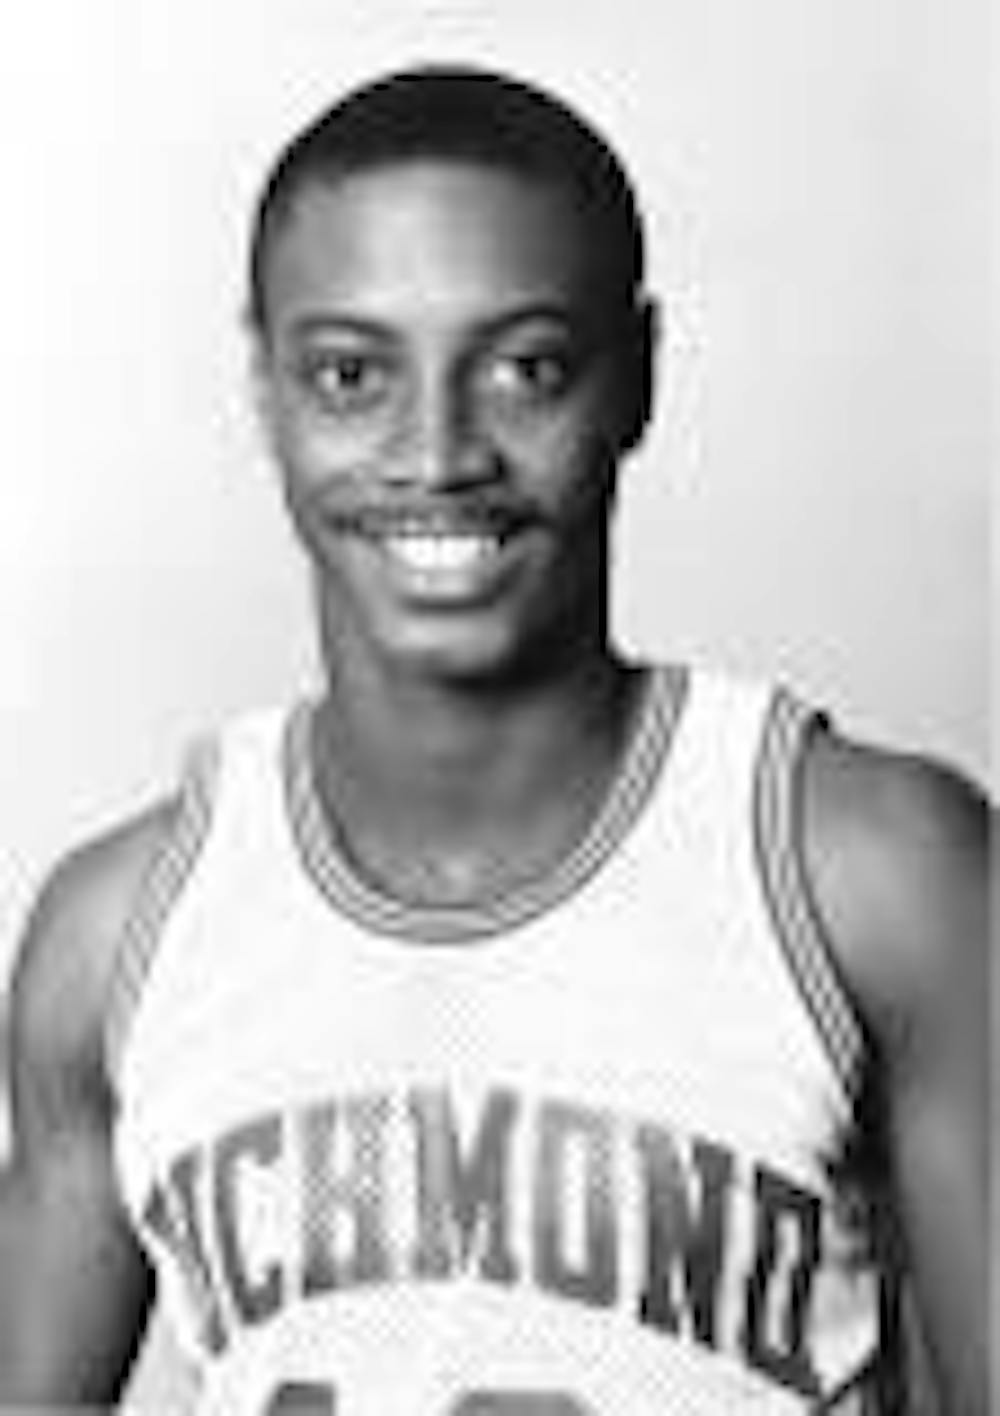 Greg Beckwith during his time as a student at the University of Richmond. Courtesy of Richmond Athletics.